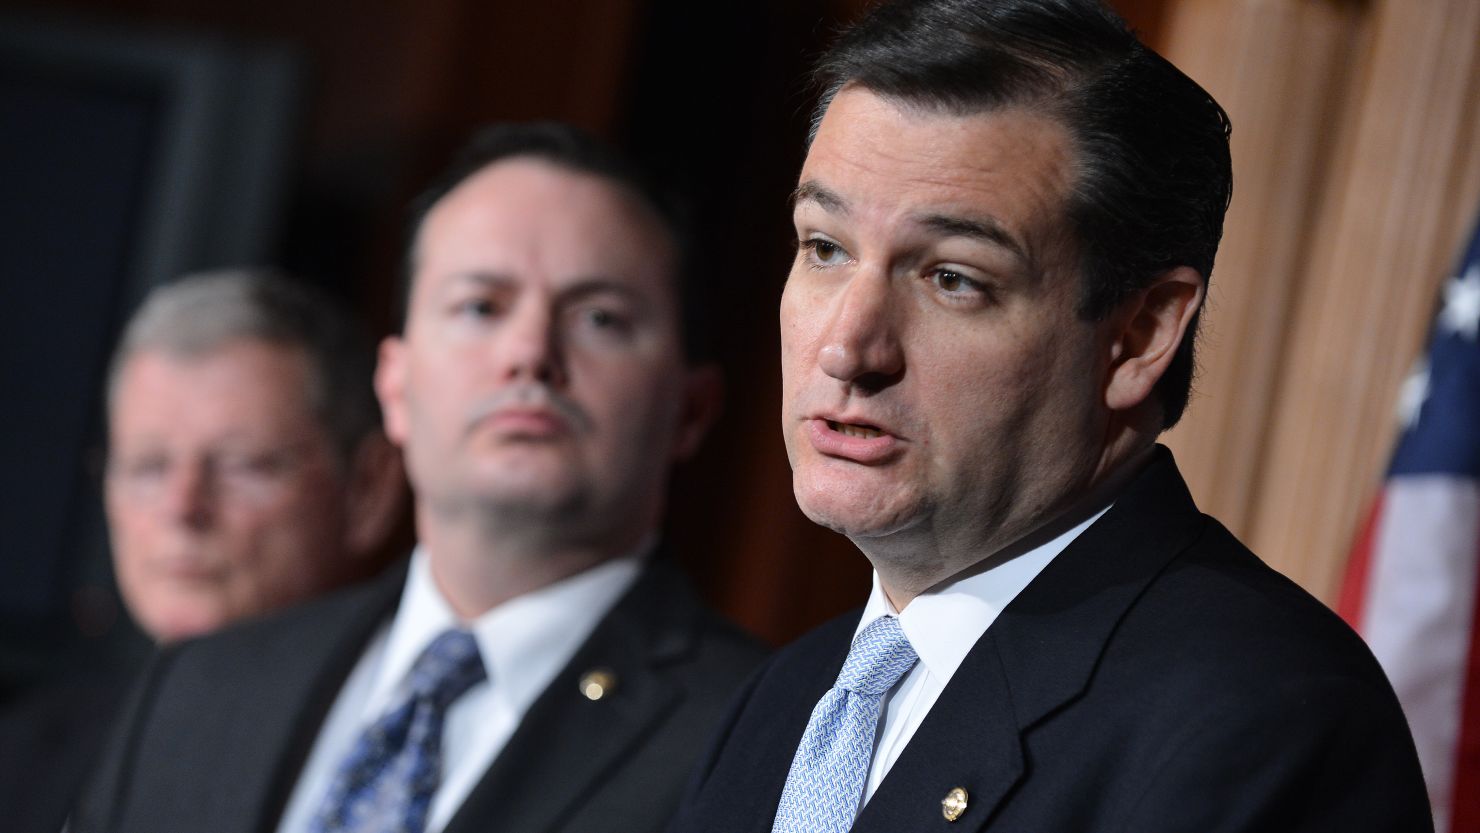  Sen. Ted Cruz, right, urges the defunding of President Obama's health care act as Sen. Mike Lee watches on March 13.
